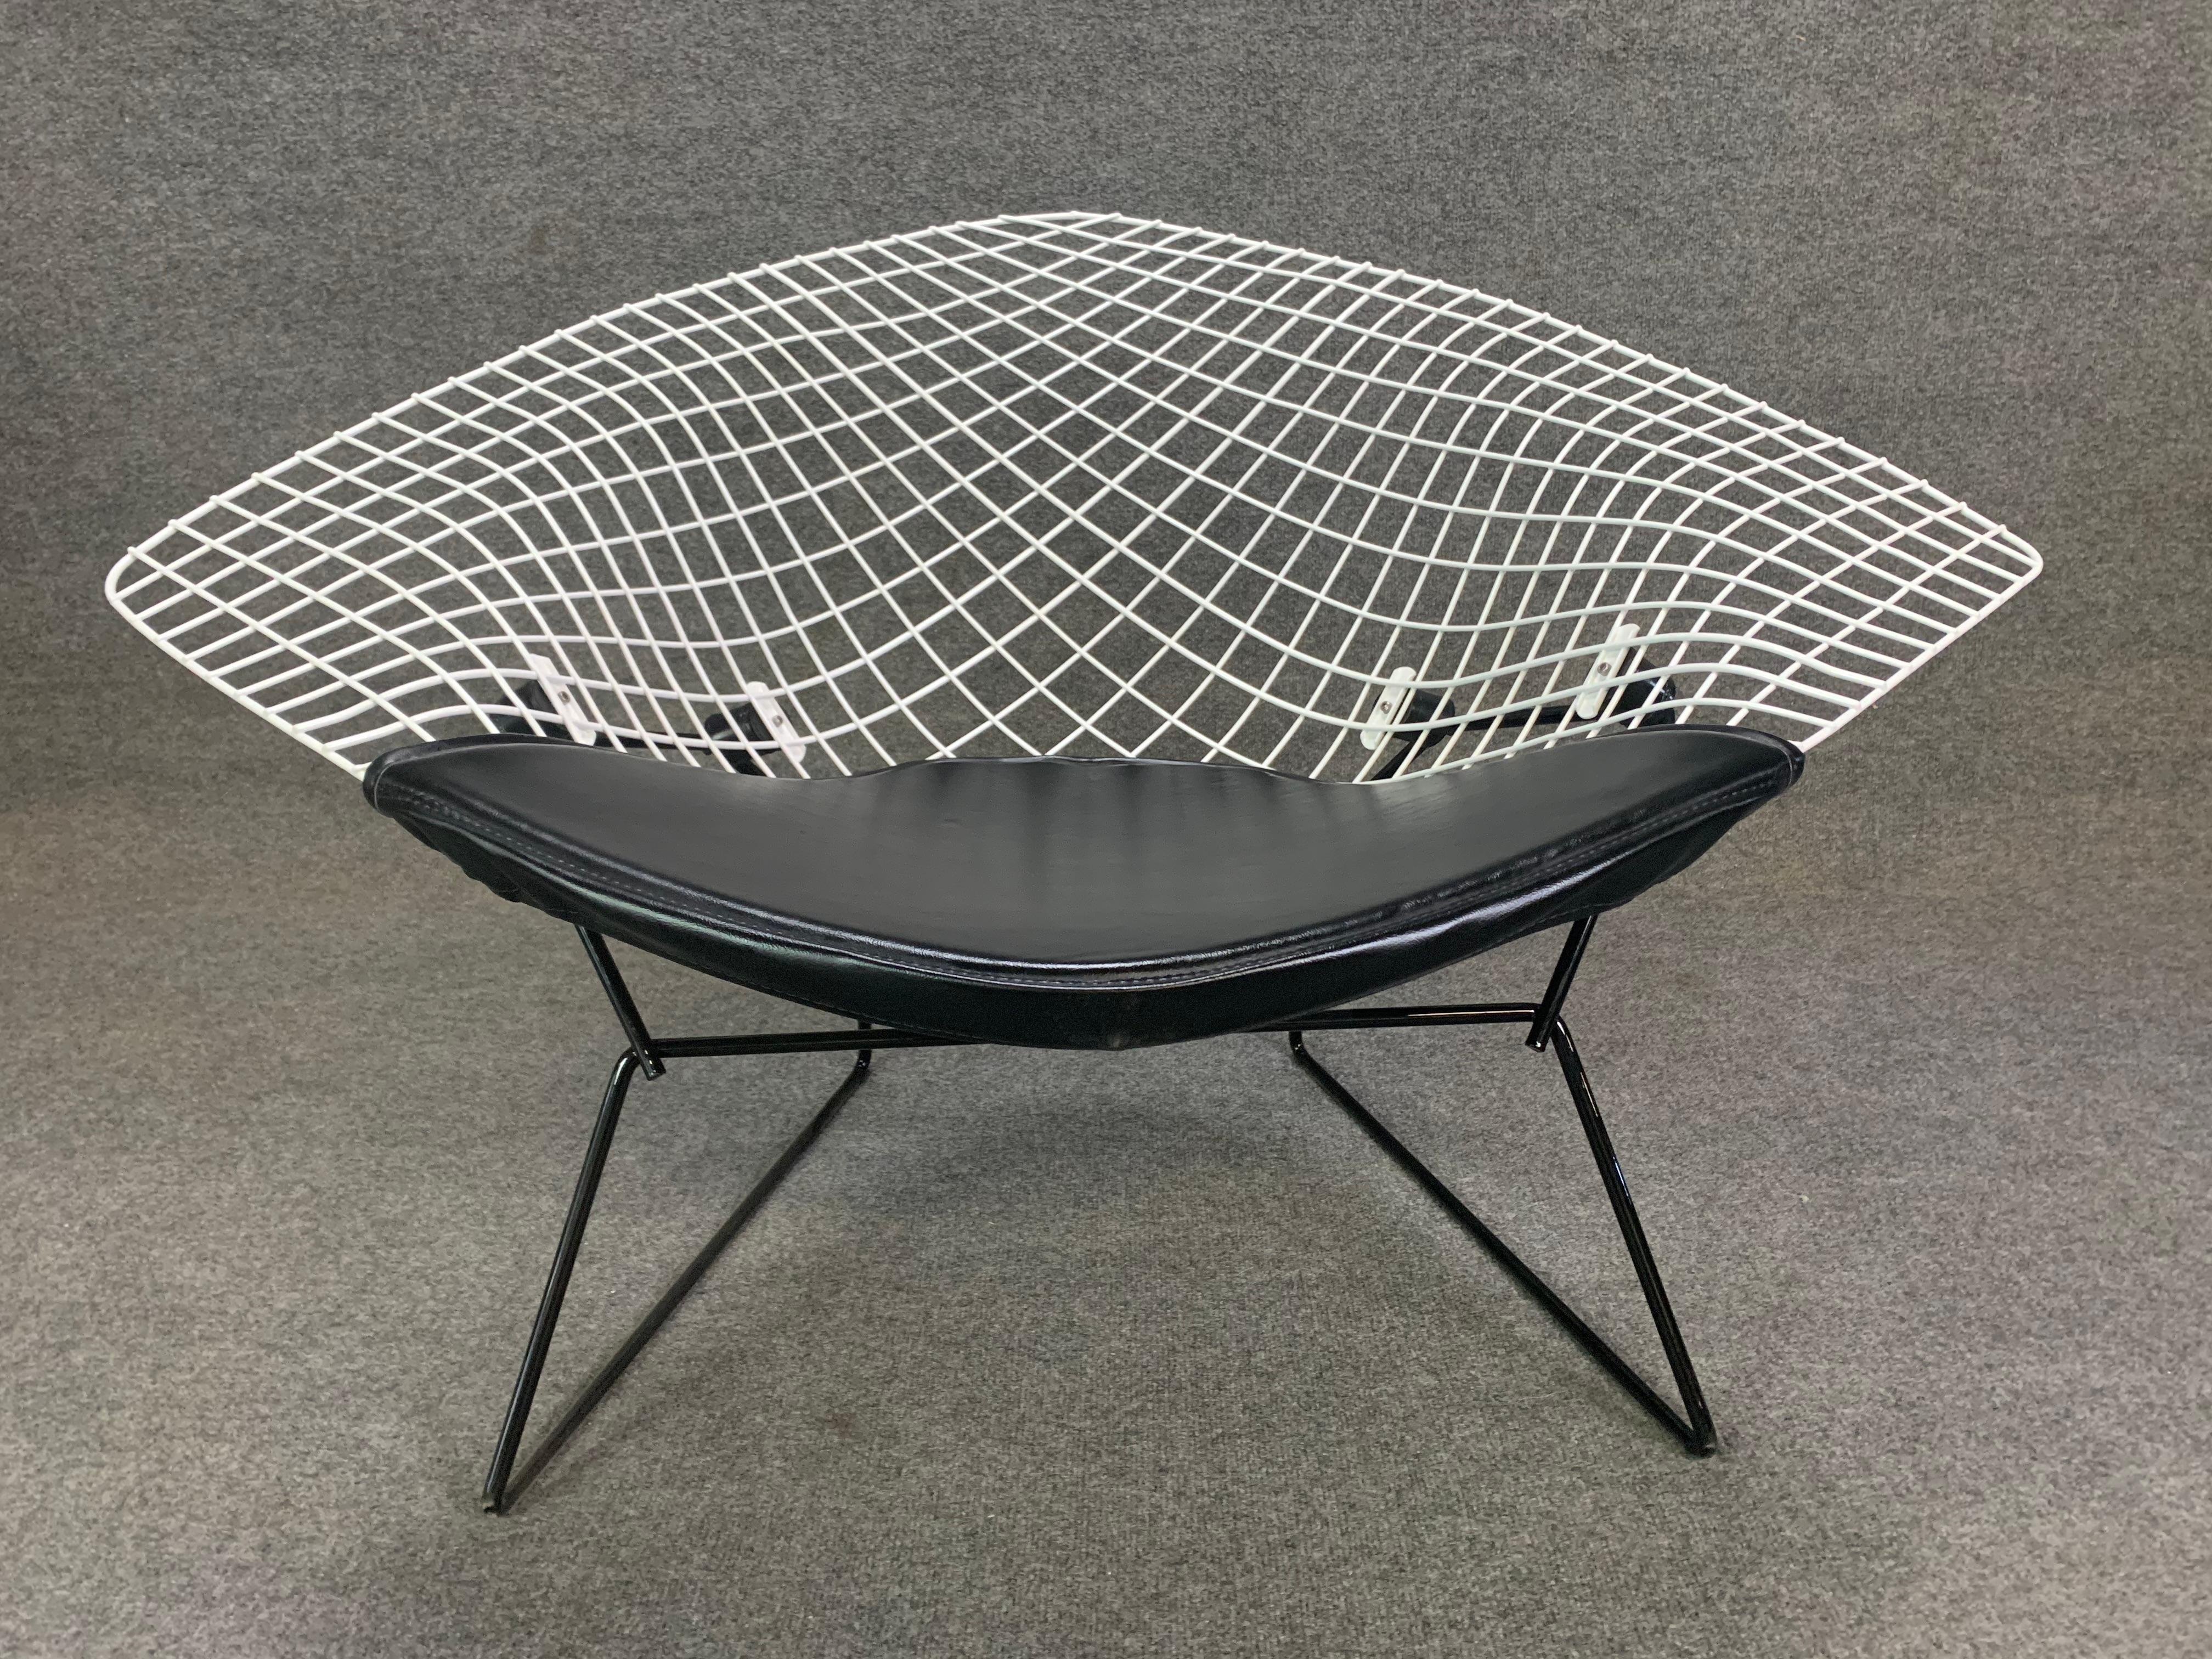 Welded Vintage Mid-Century Modern Large Diamond Chair by Harry Bertoia for Knoll